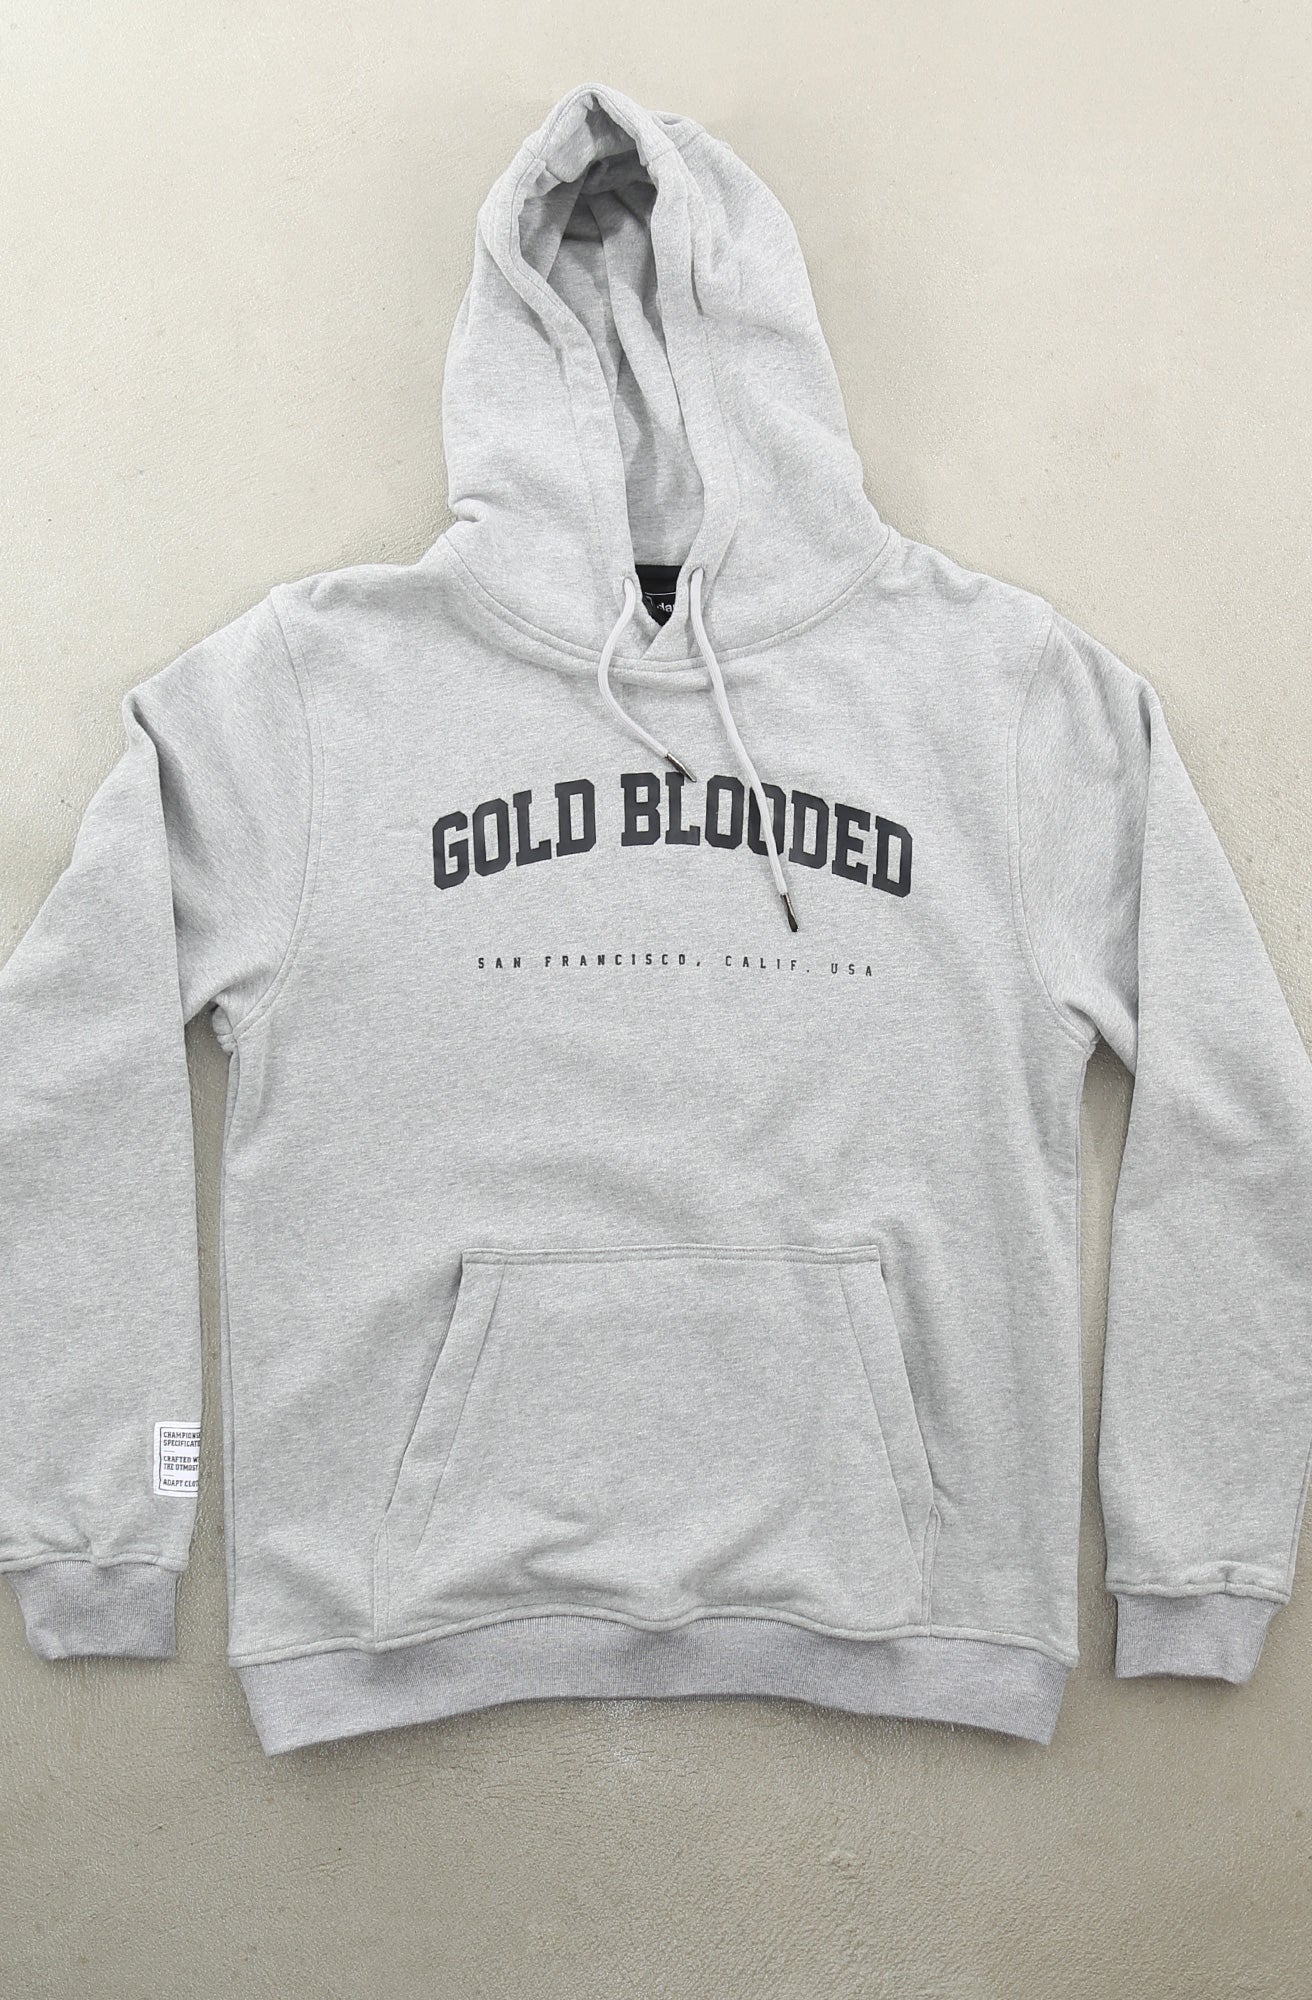 Gold Blooded League (Men's Heather A1 Hoody)